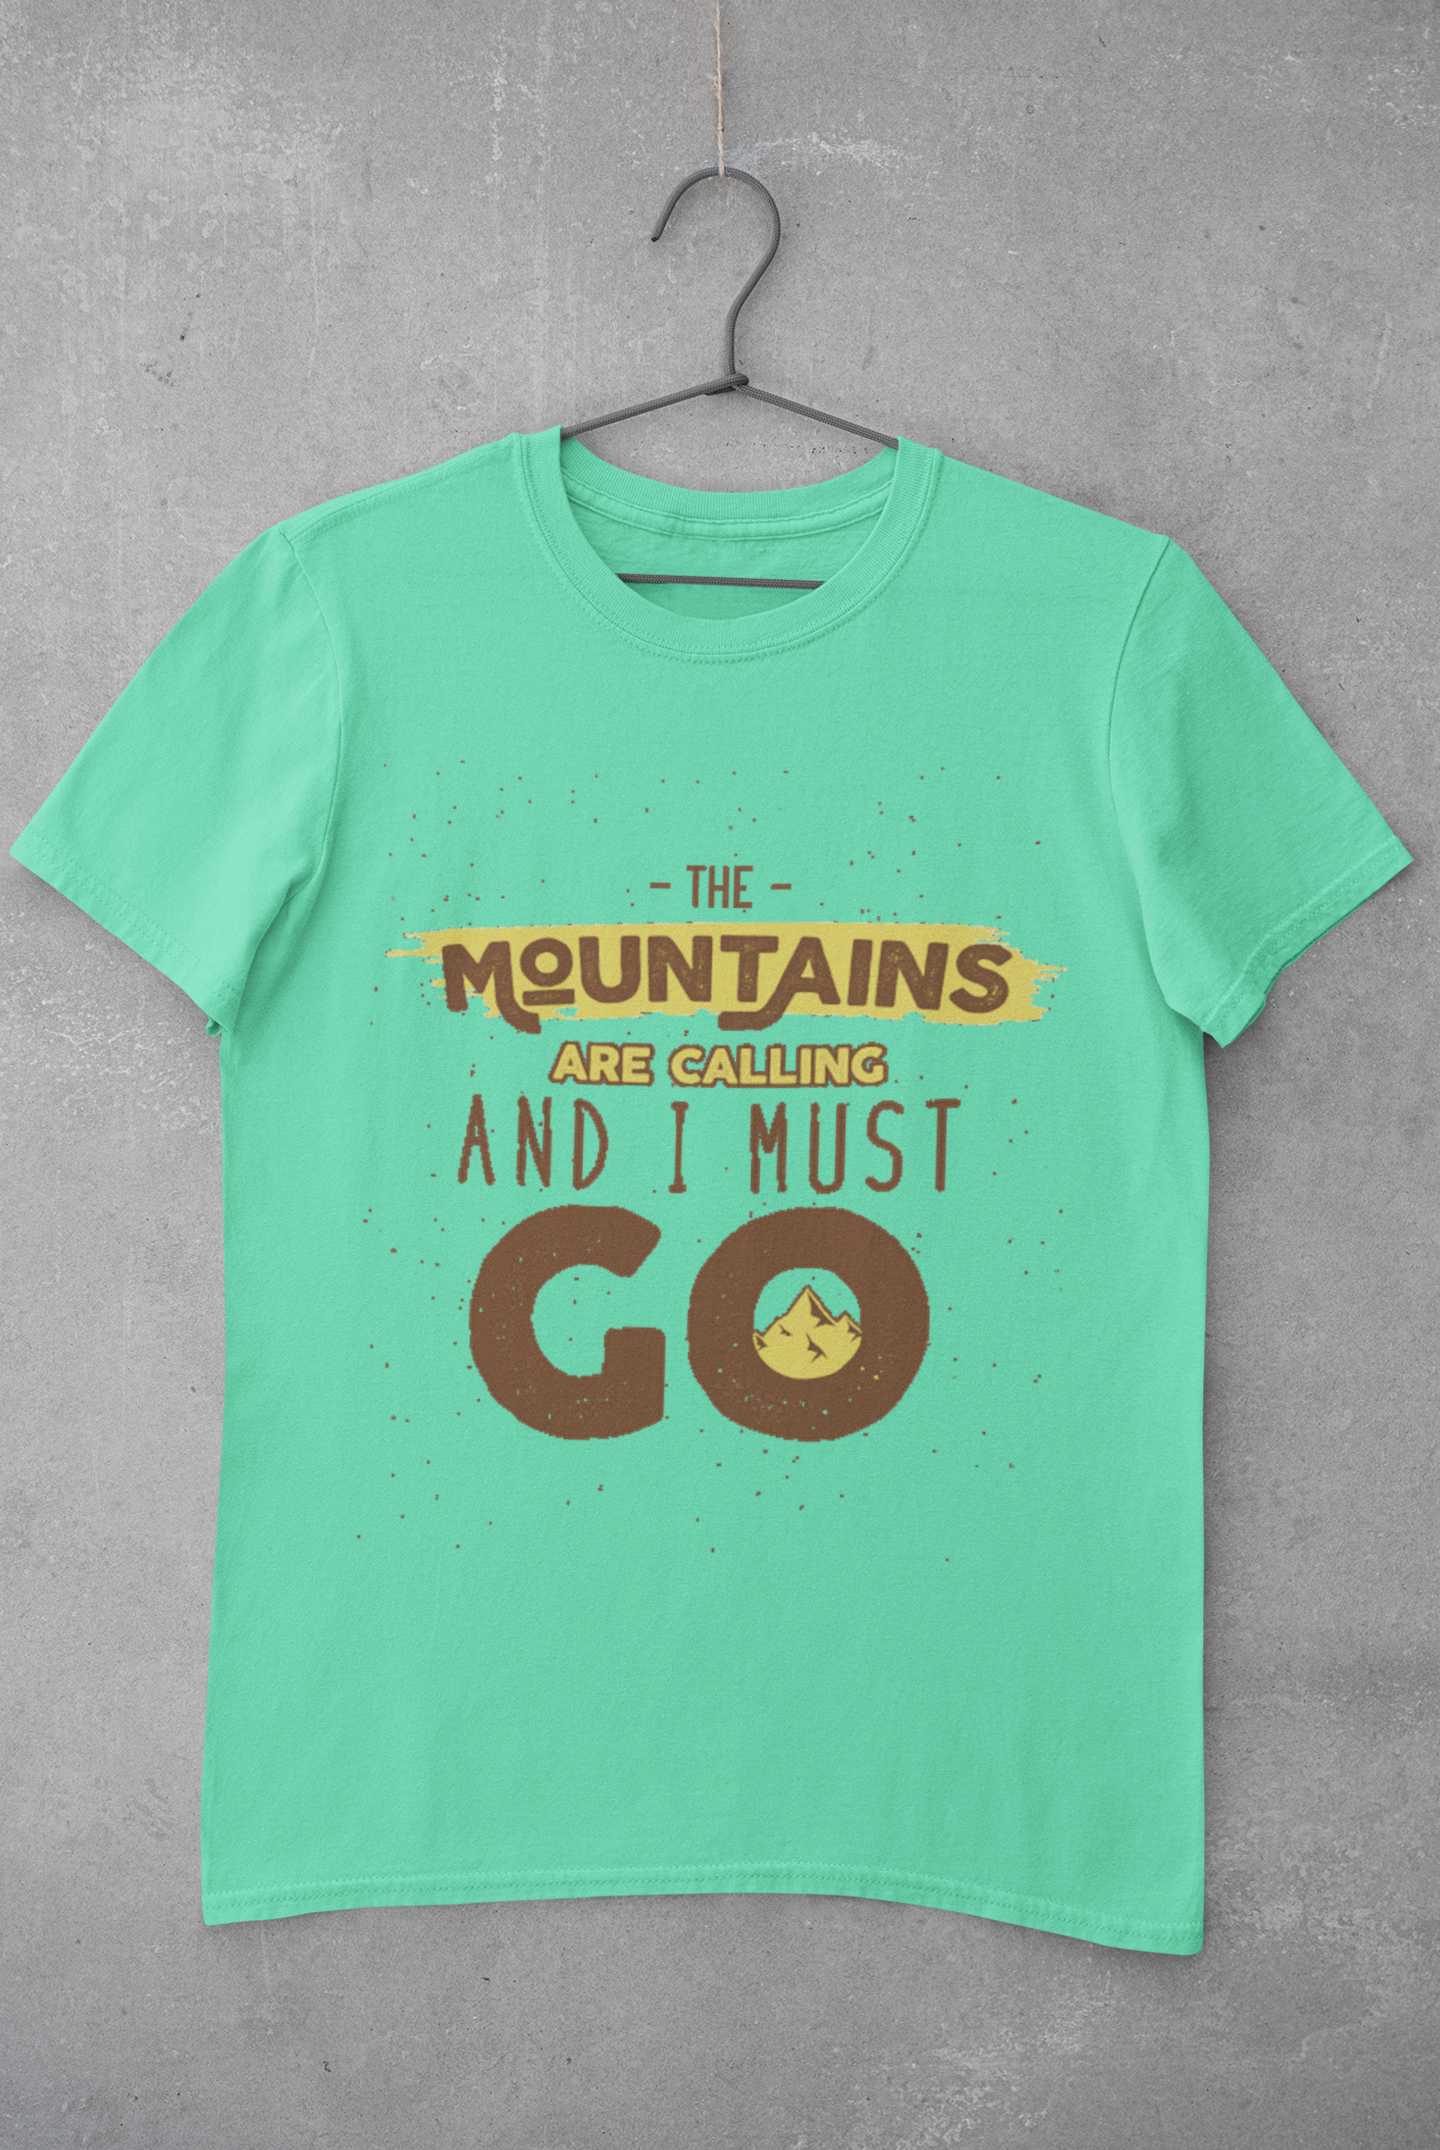 The mountains are calling and I must go Mens Half Sleeves T-shirt- FunkyTeesClub